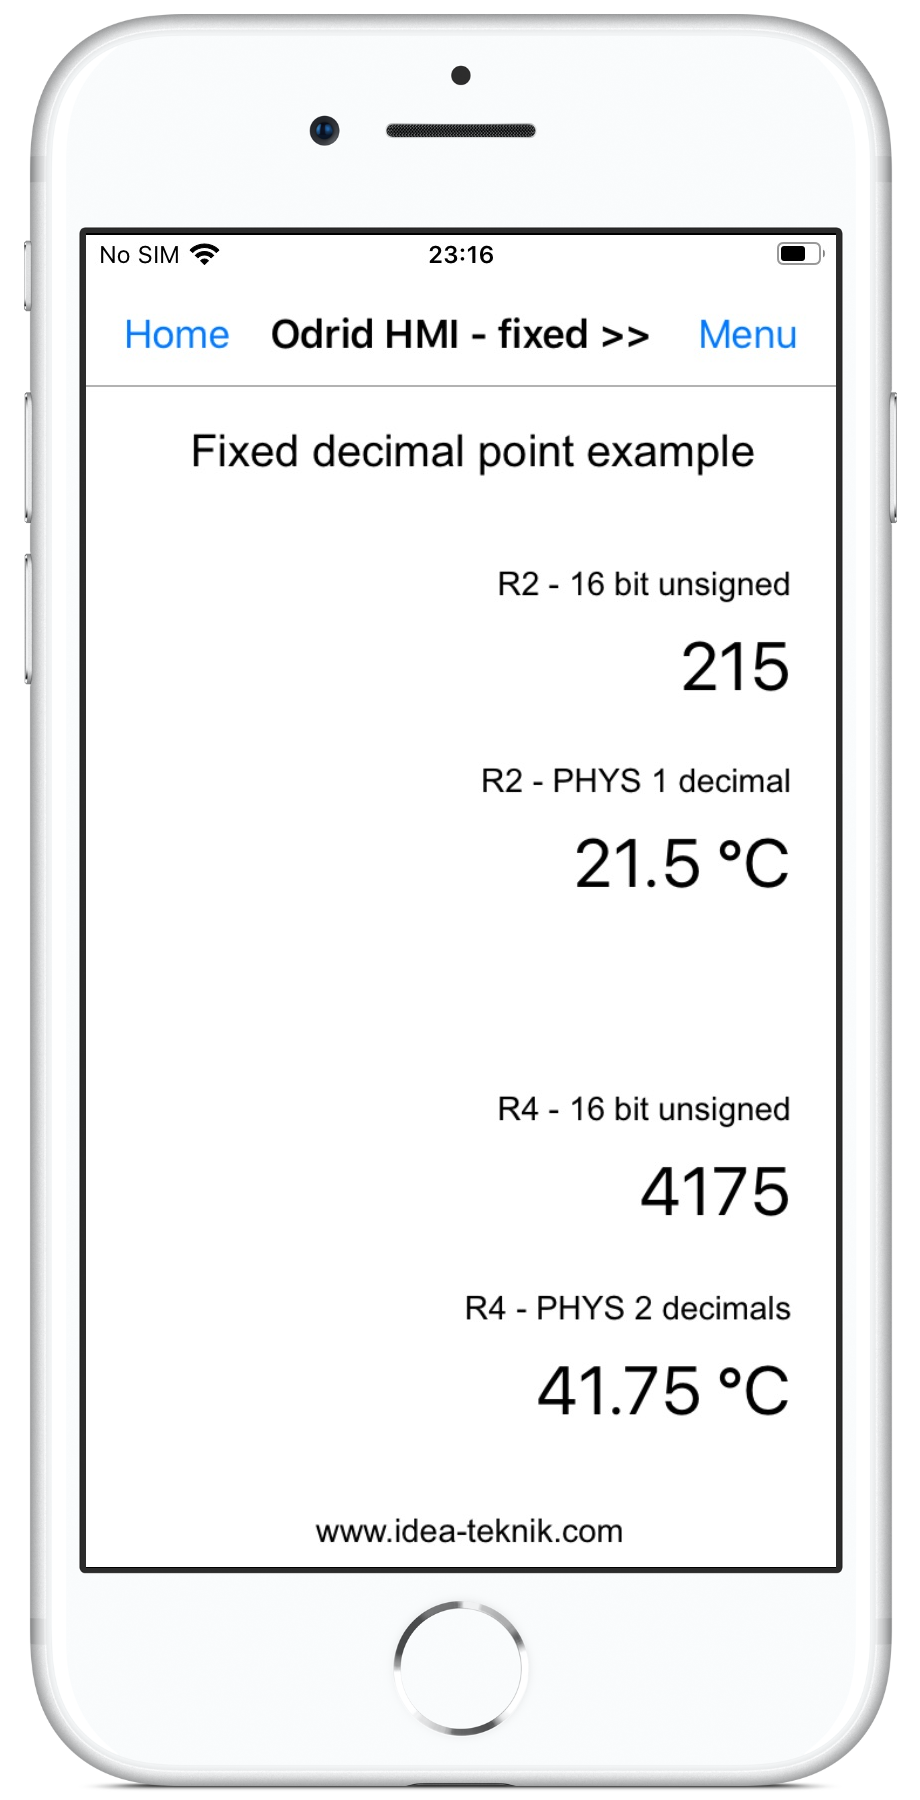 HMI Droid for iOS - fixed decinal point